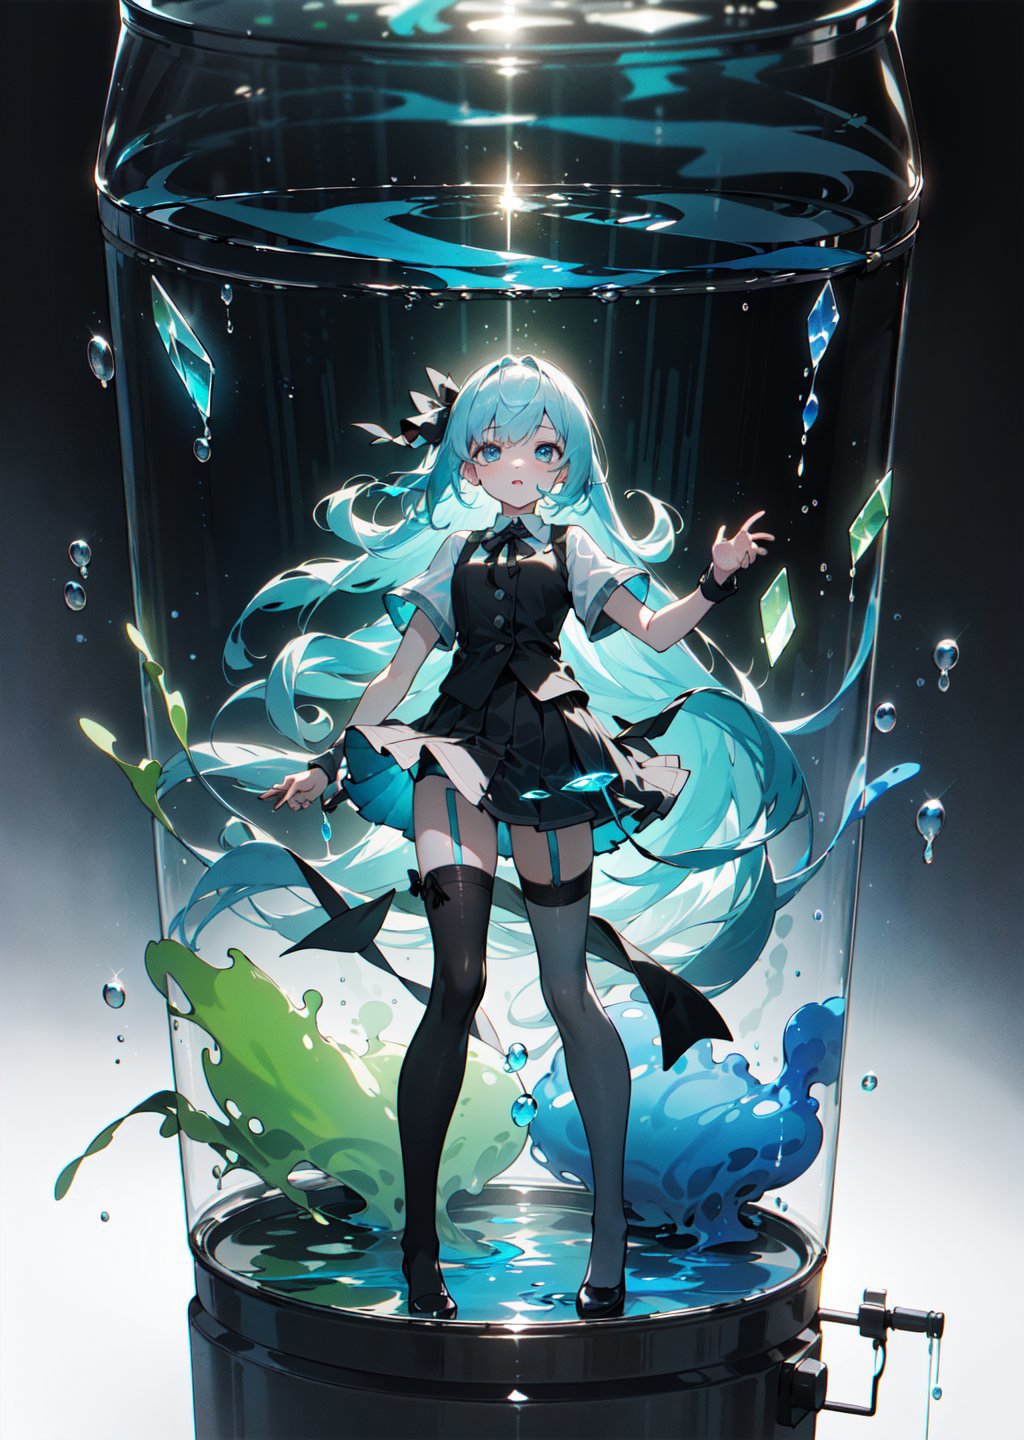 A young girl with blue hair and a black dress is posing as a merman in a glass case.